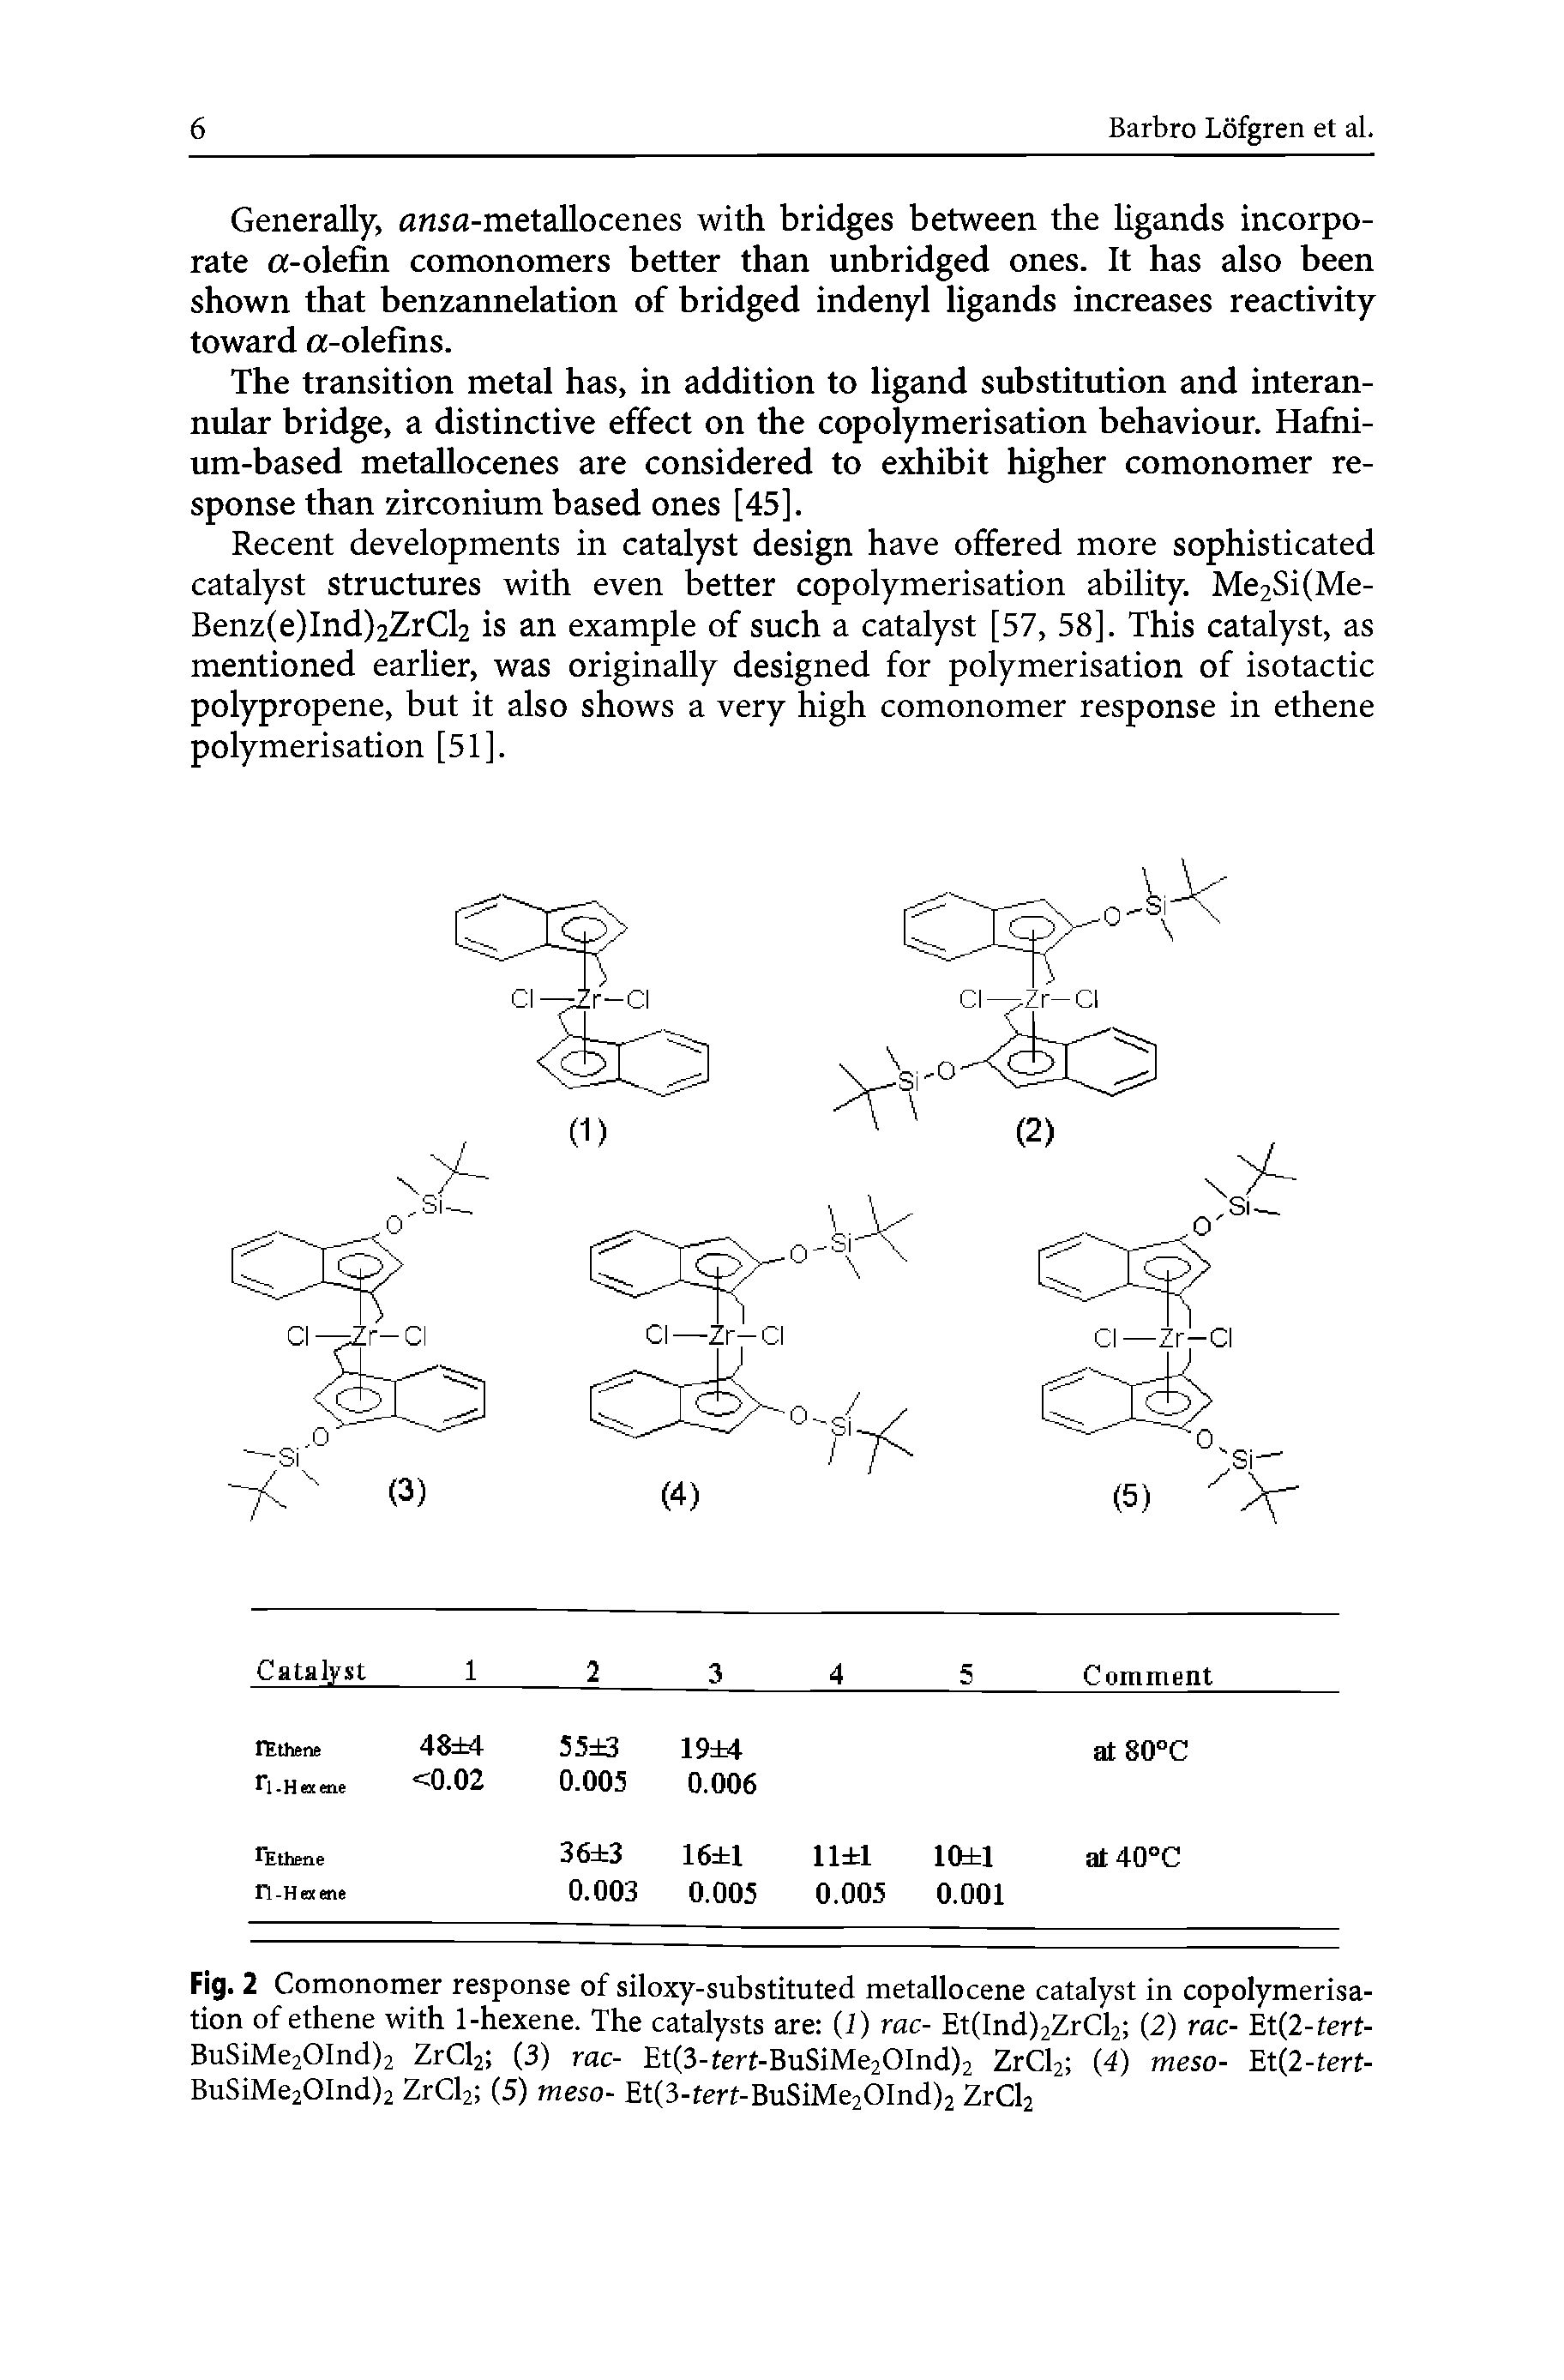 Fig. 2 Comonomer response of siloxy-substituted metallocene catalyst in copolymerisation of ethene with 1-hexene. The catalysts are (1) rac- Et(Ind)2ZrCl2 (2) rac- Et(2-ferf-BuSiMe2OInd)2 ZrCl2 (3) rac- Et(3-ferf-BuSiMe2OInd)2 ZrCl2 (4) meso- Et(2-tert-BuSiMe2OInd)2 ZrCl2 (5) meso- Et(3-terf-BuSiMe2OInd)2 ZrCl2...